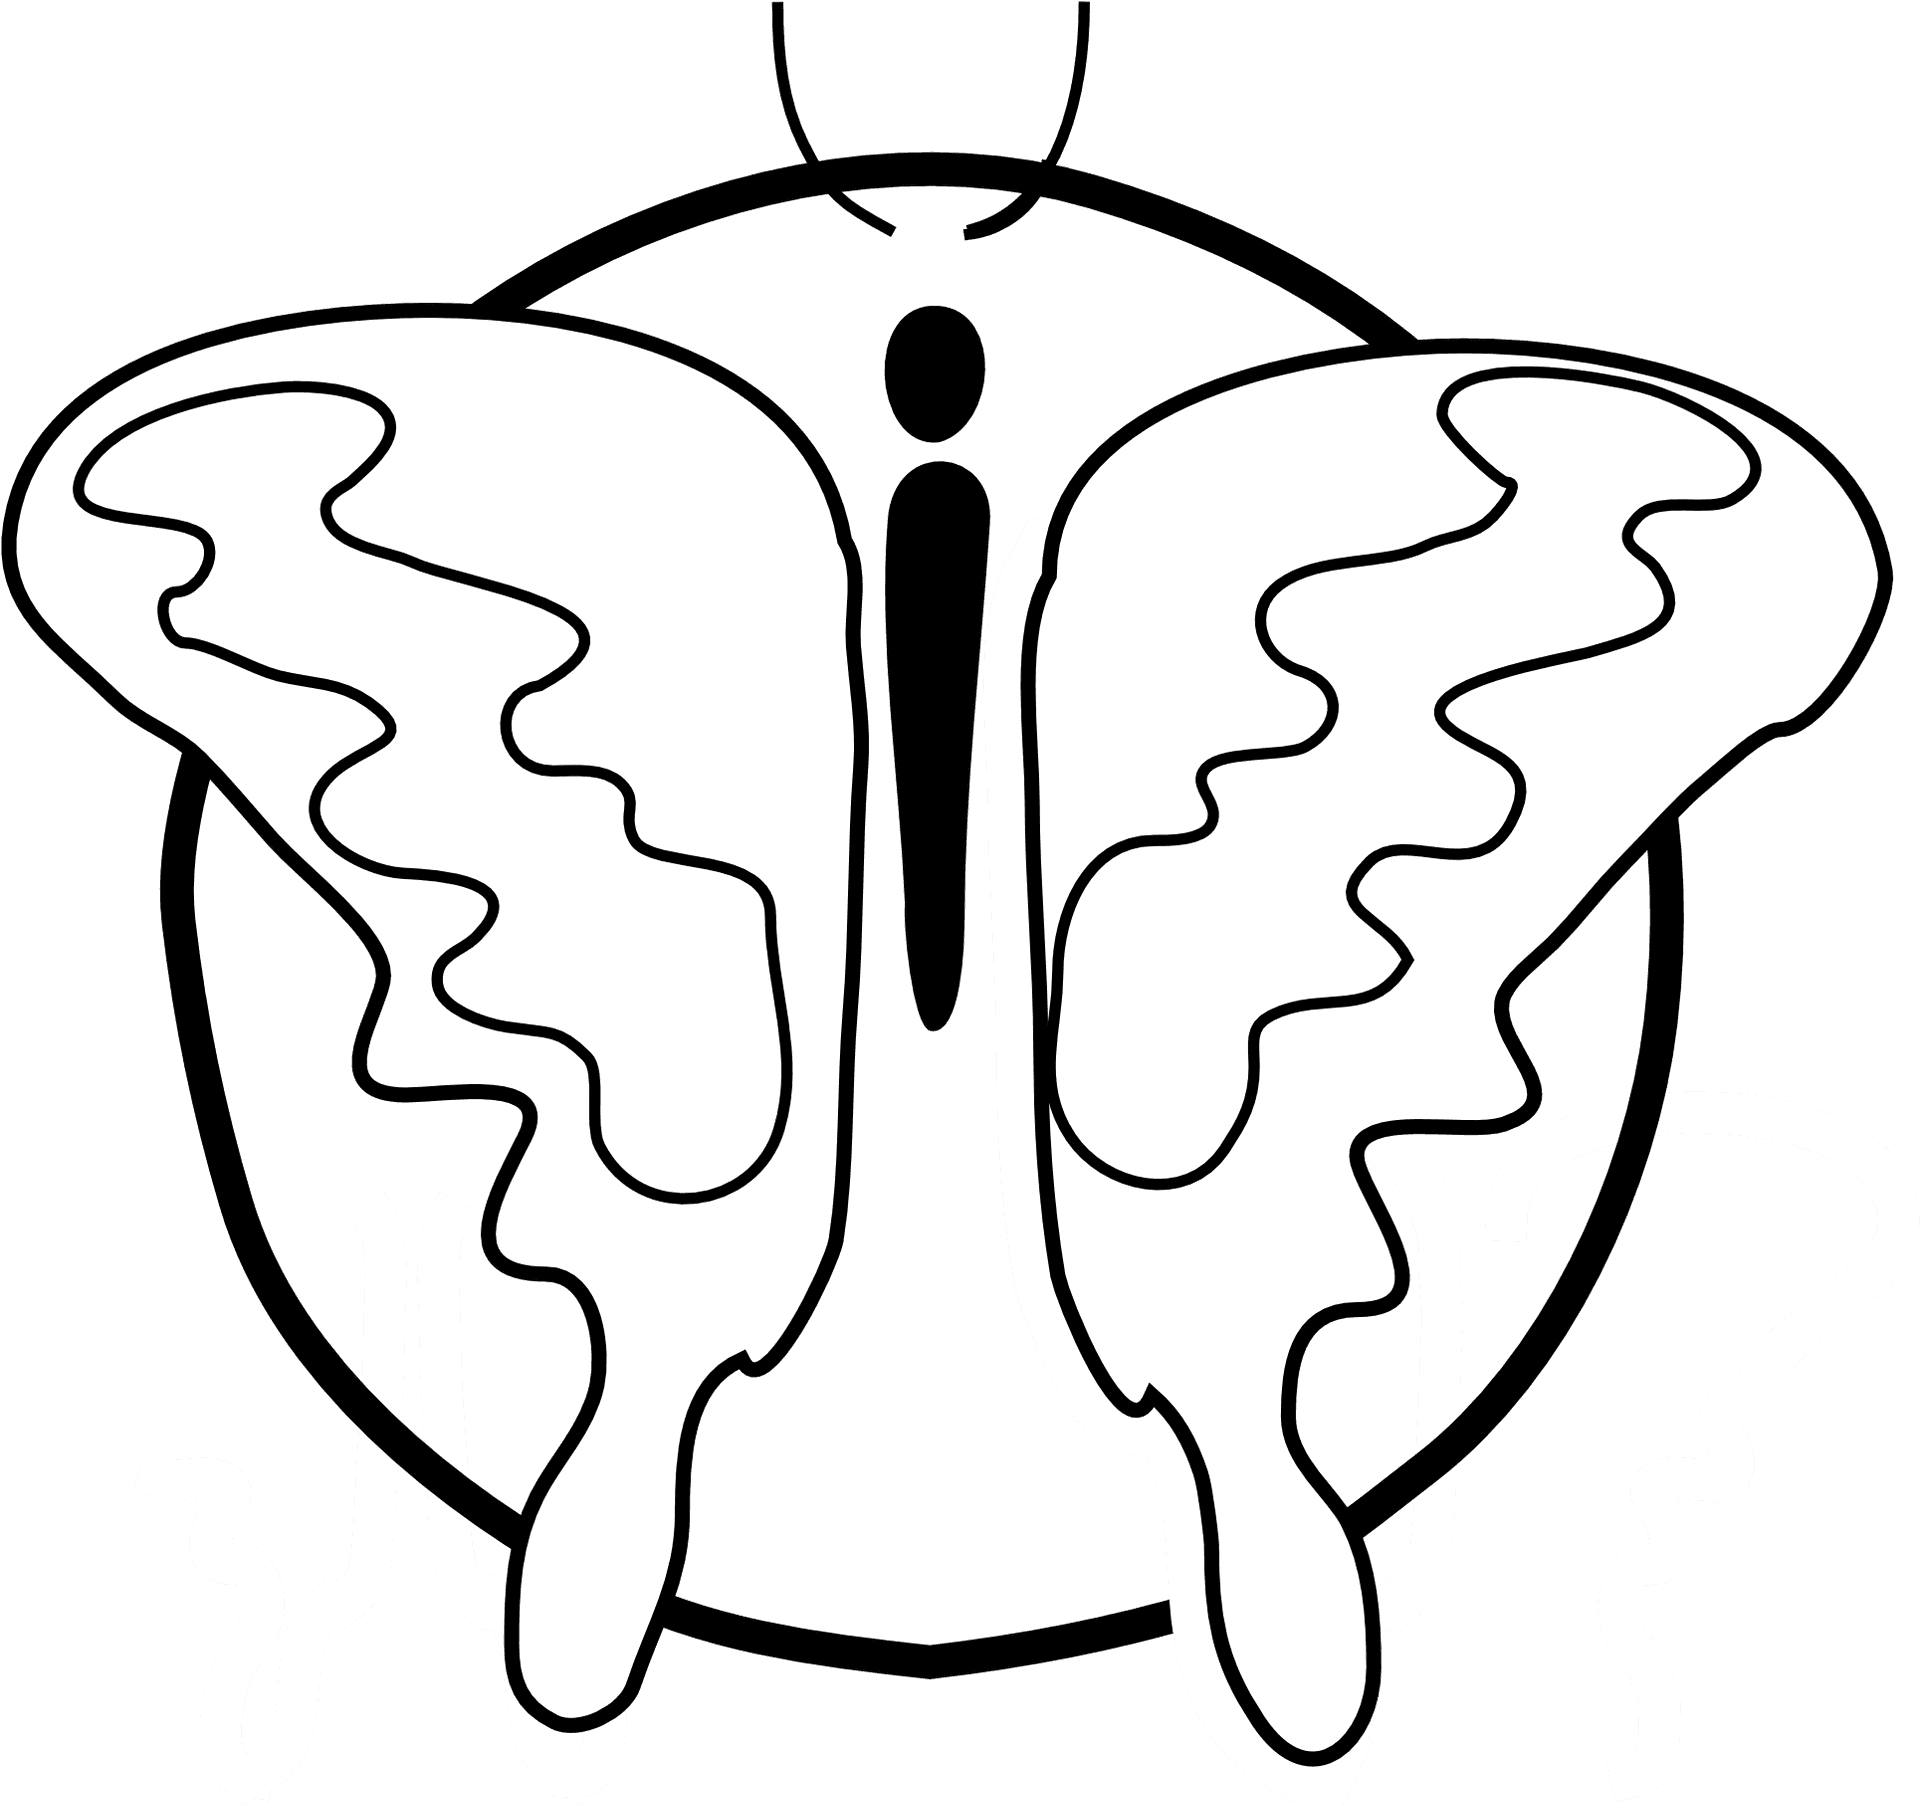 Monochrome Butterfly Illustration.png PNG